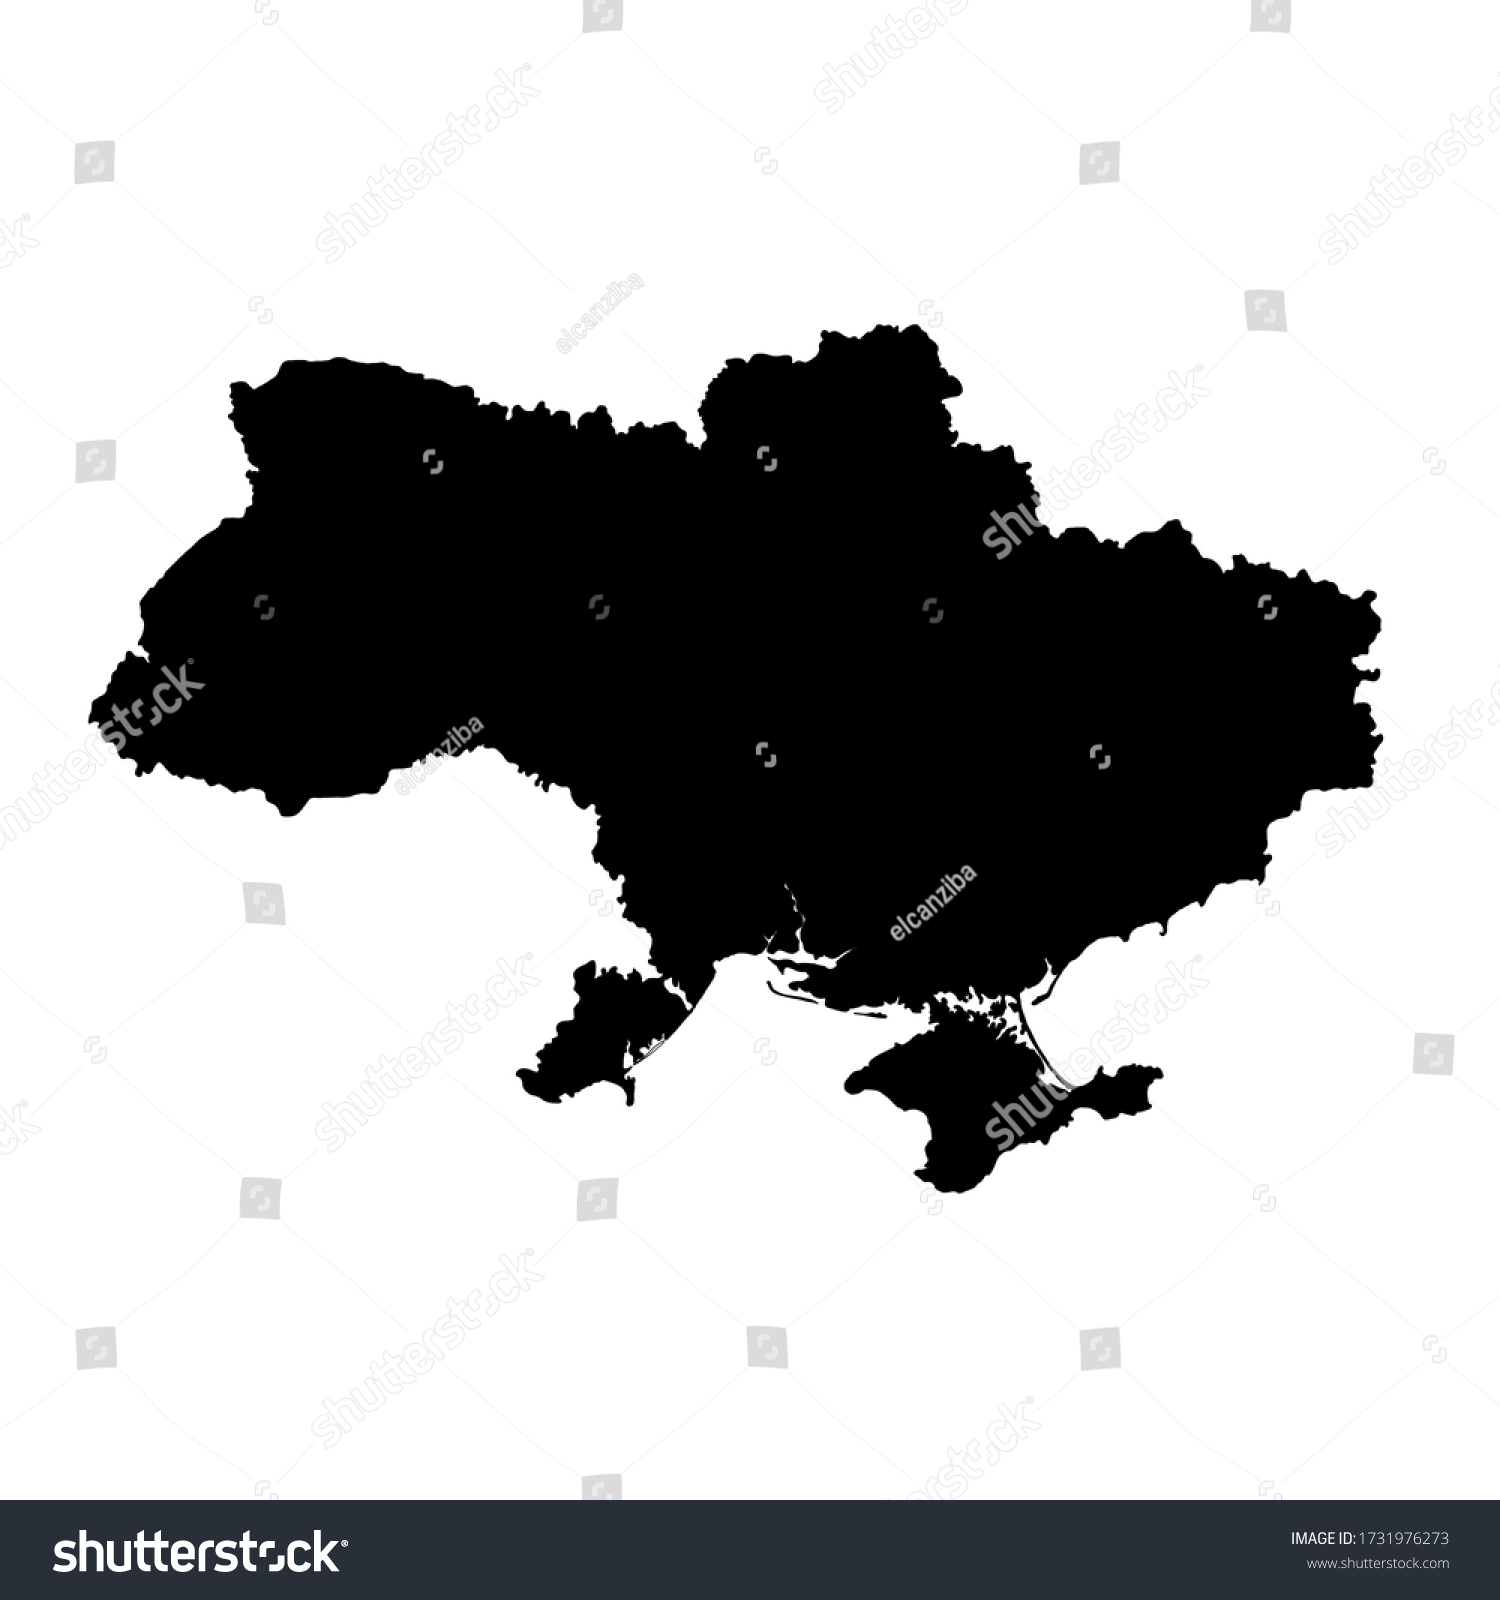 Ukraine political map is made of 100% hand-drawn shapes, which makes it really useful for different graphical or printing projects. The map is fully filled with color. #1731976273